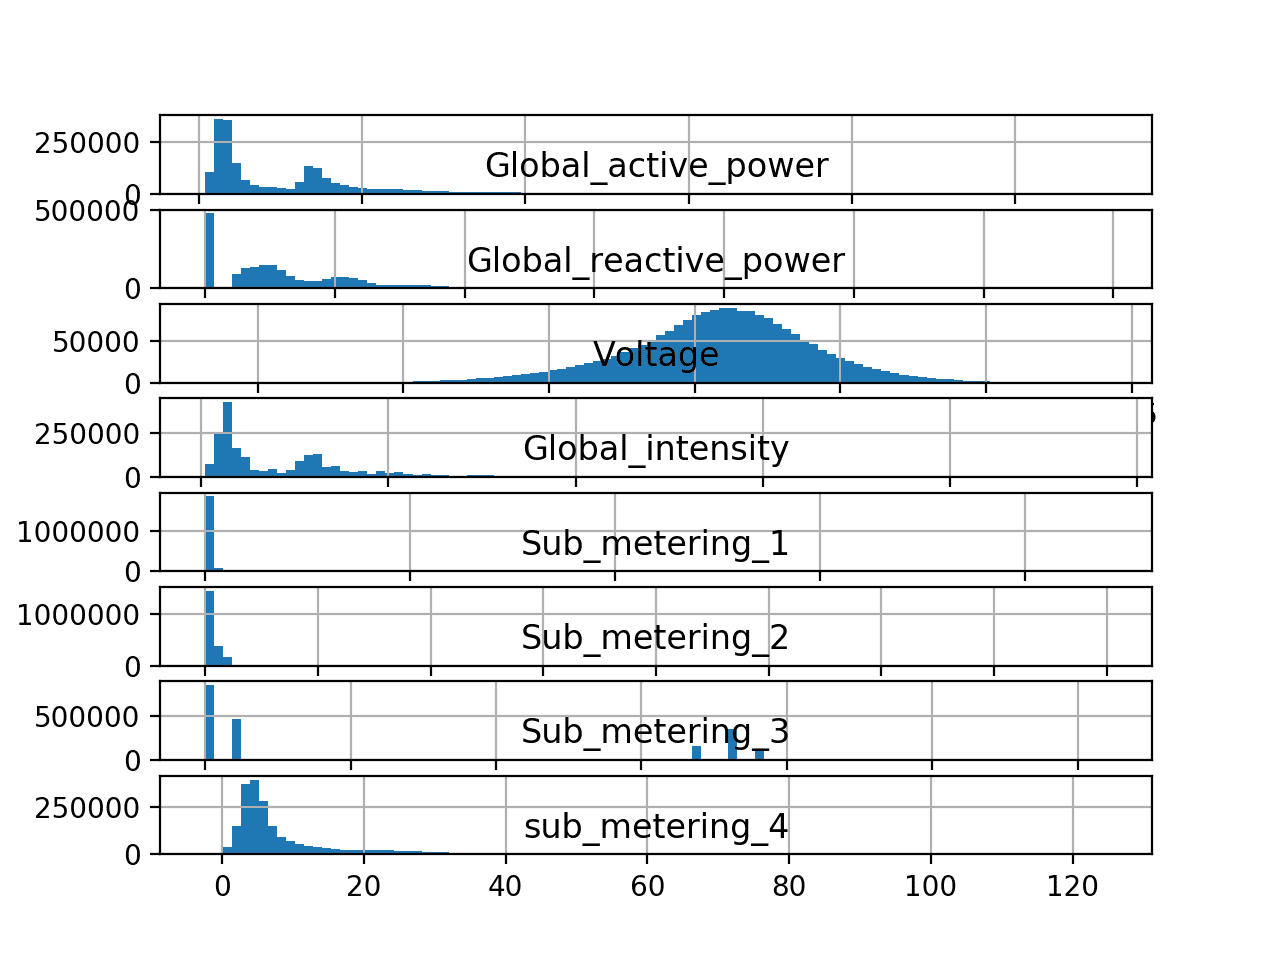 Histogram plots for Each Variable in the Power Consumption Dataset